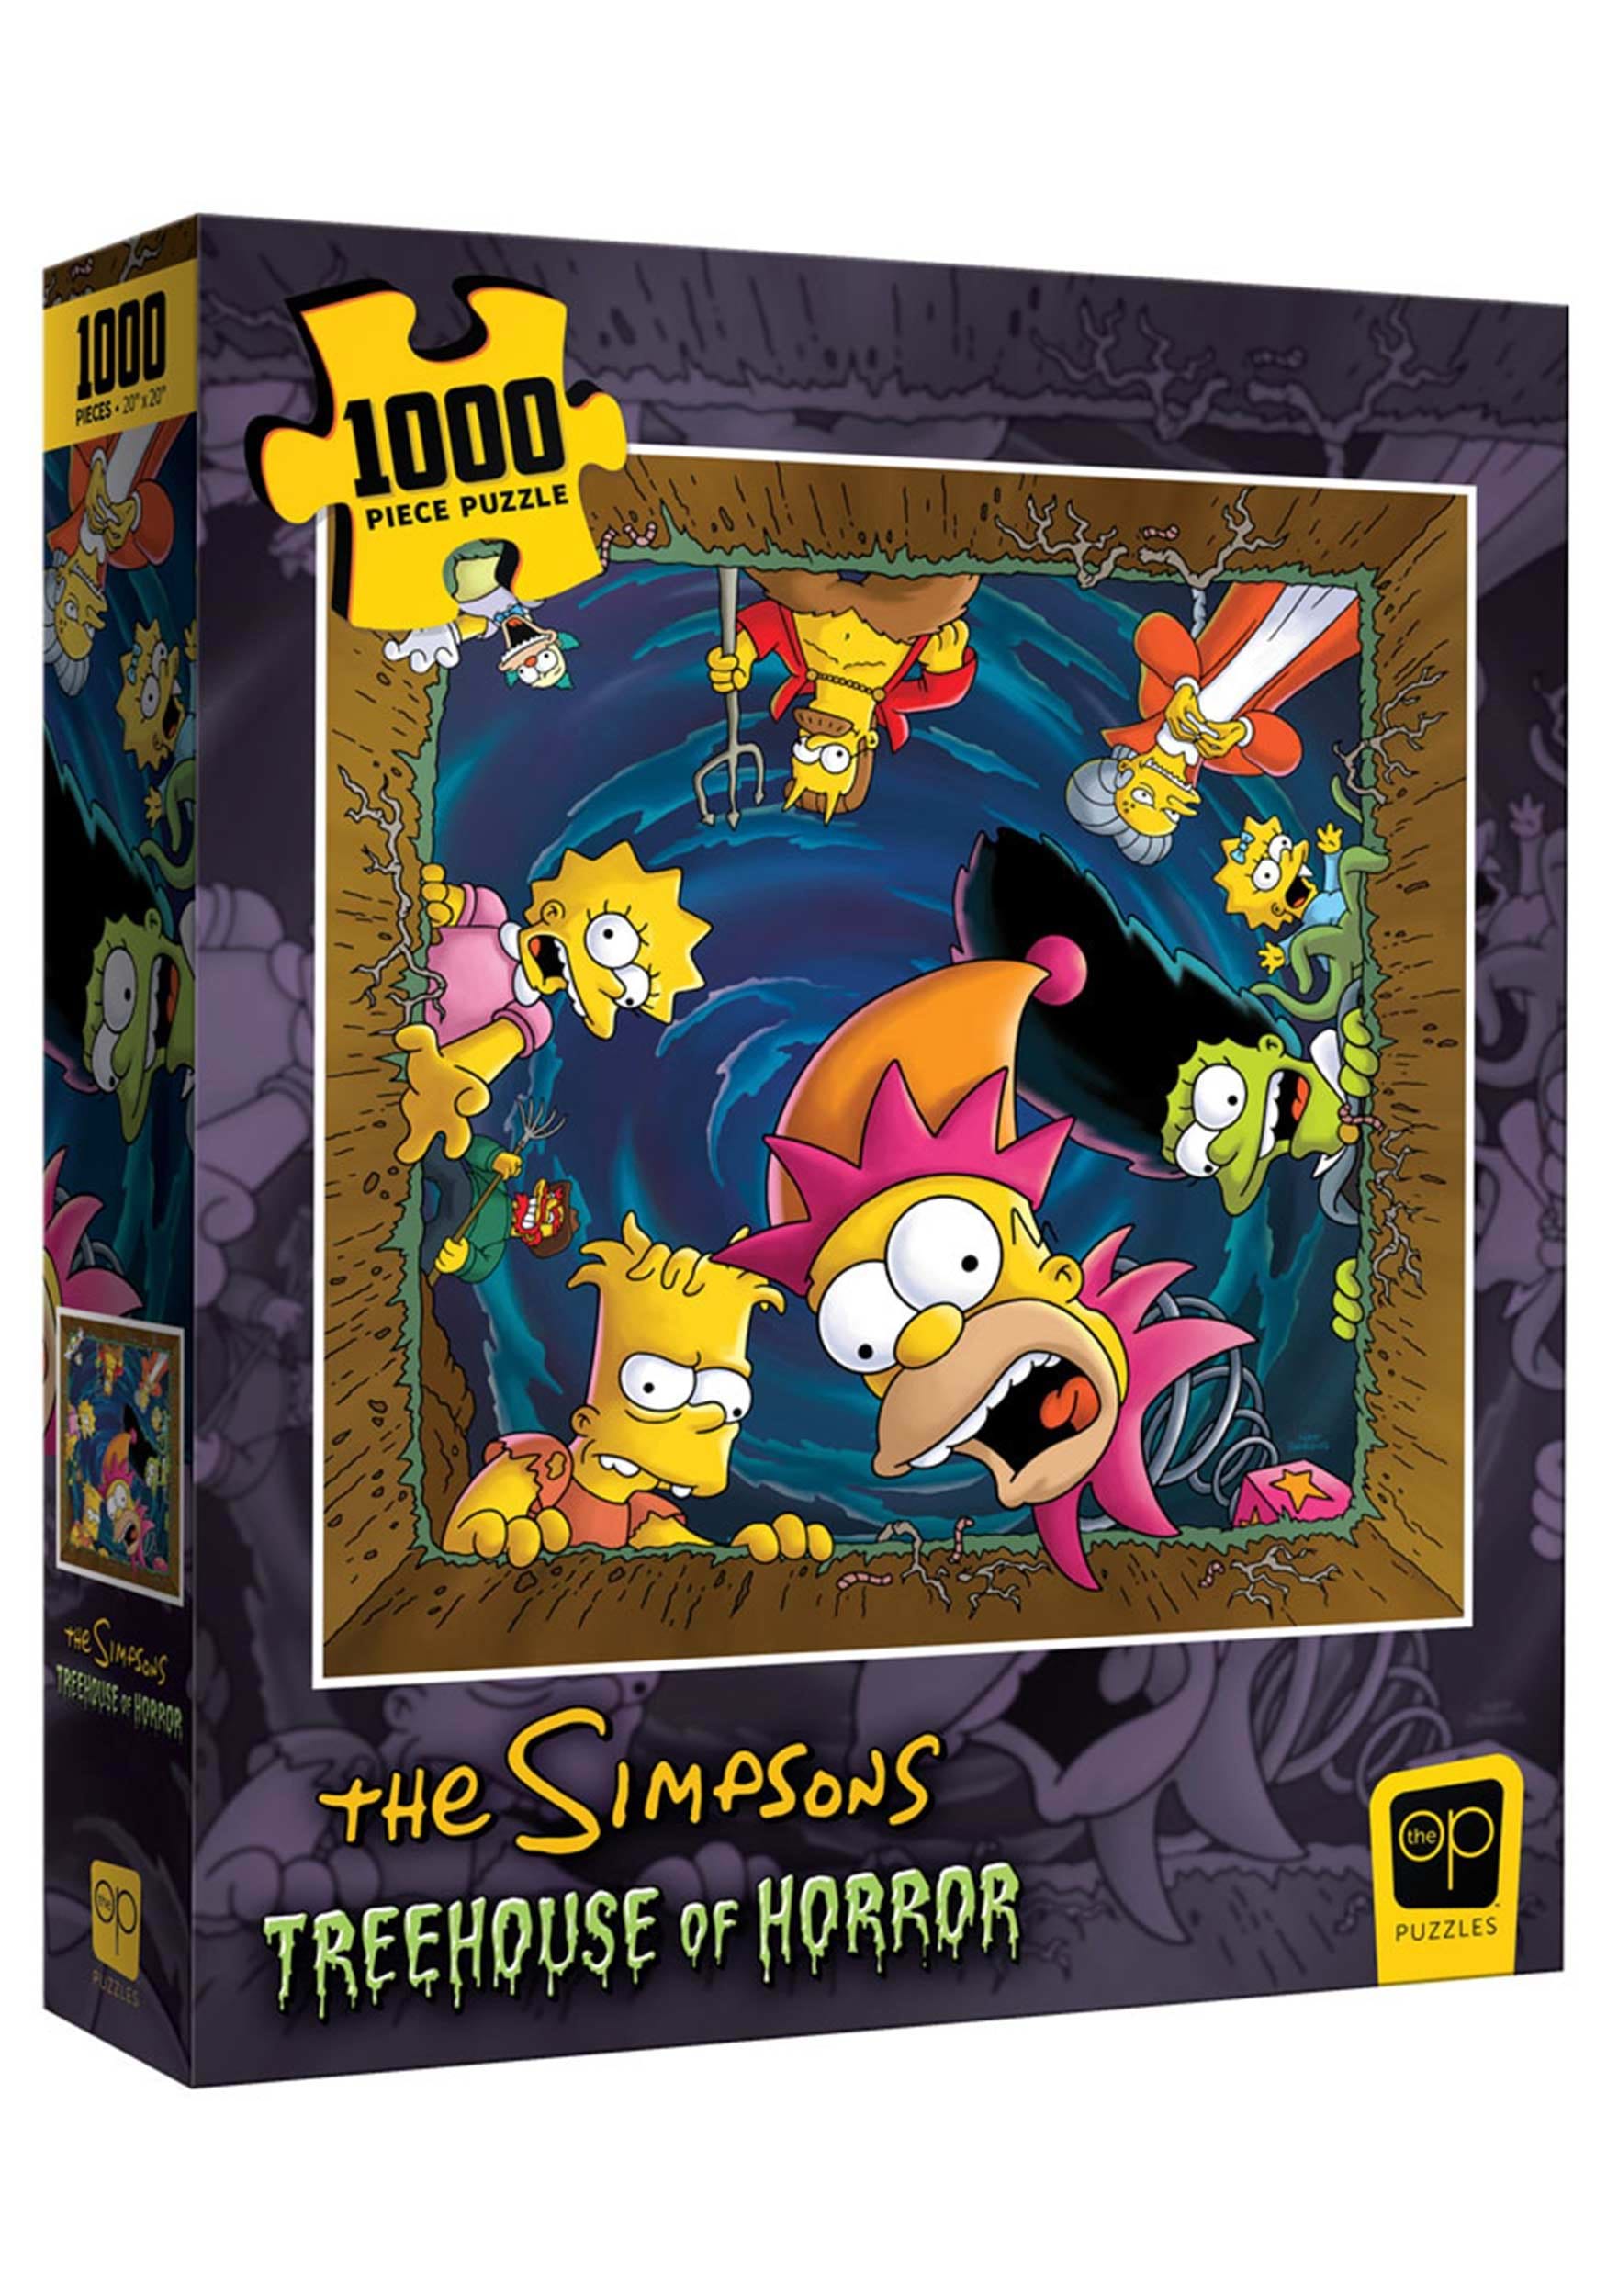 The Simpsons Treehouse of Horror "Coffin" (1000 pc puzzle)